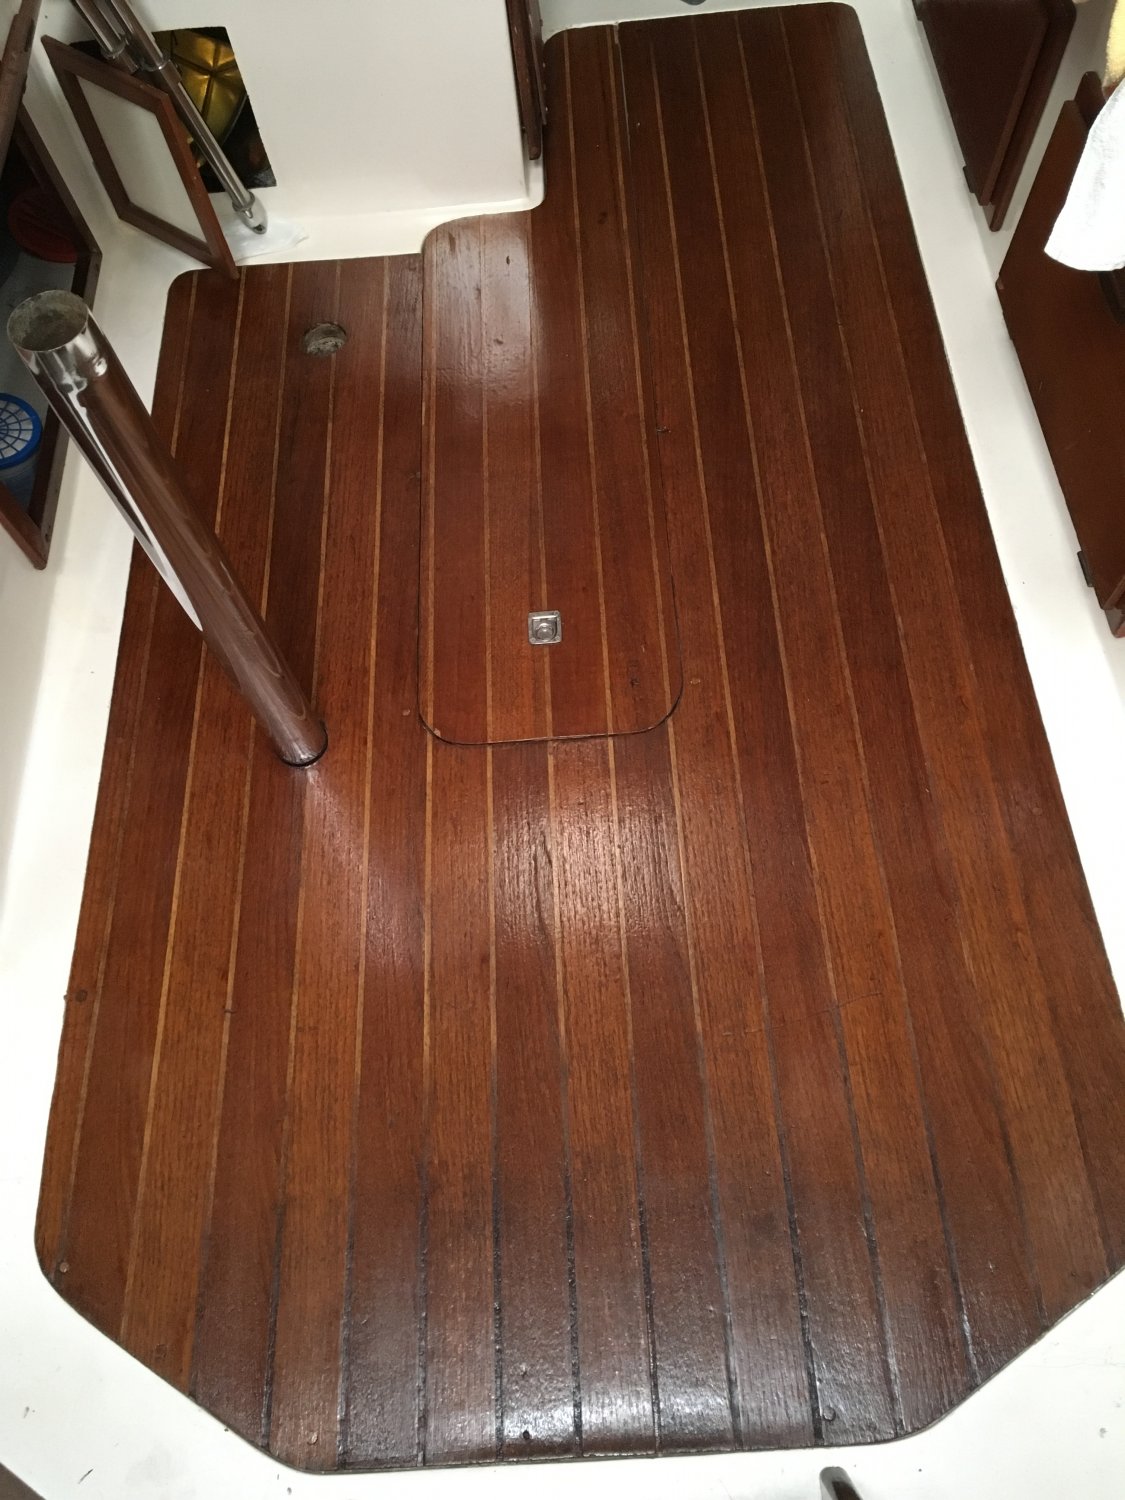 Refinished teak & holly cabin sole 2016